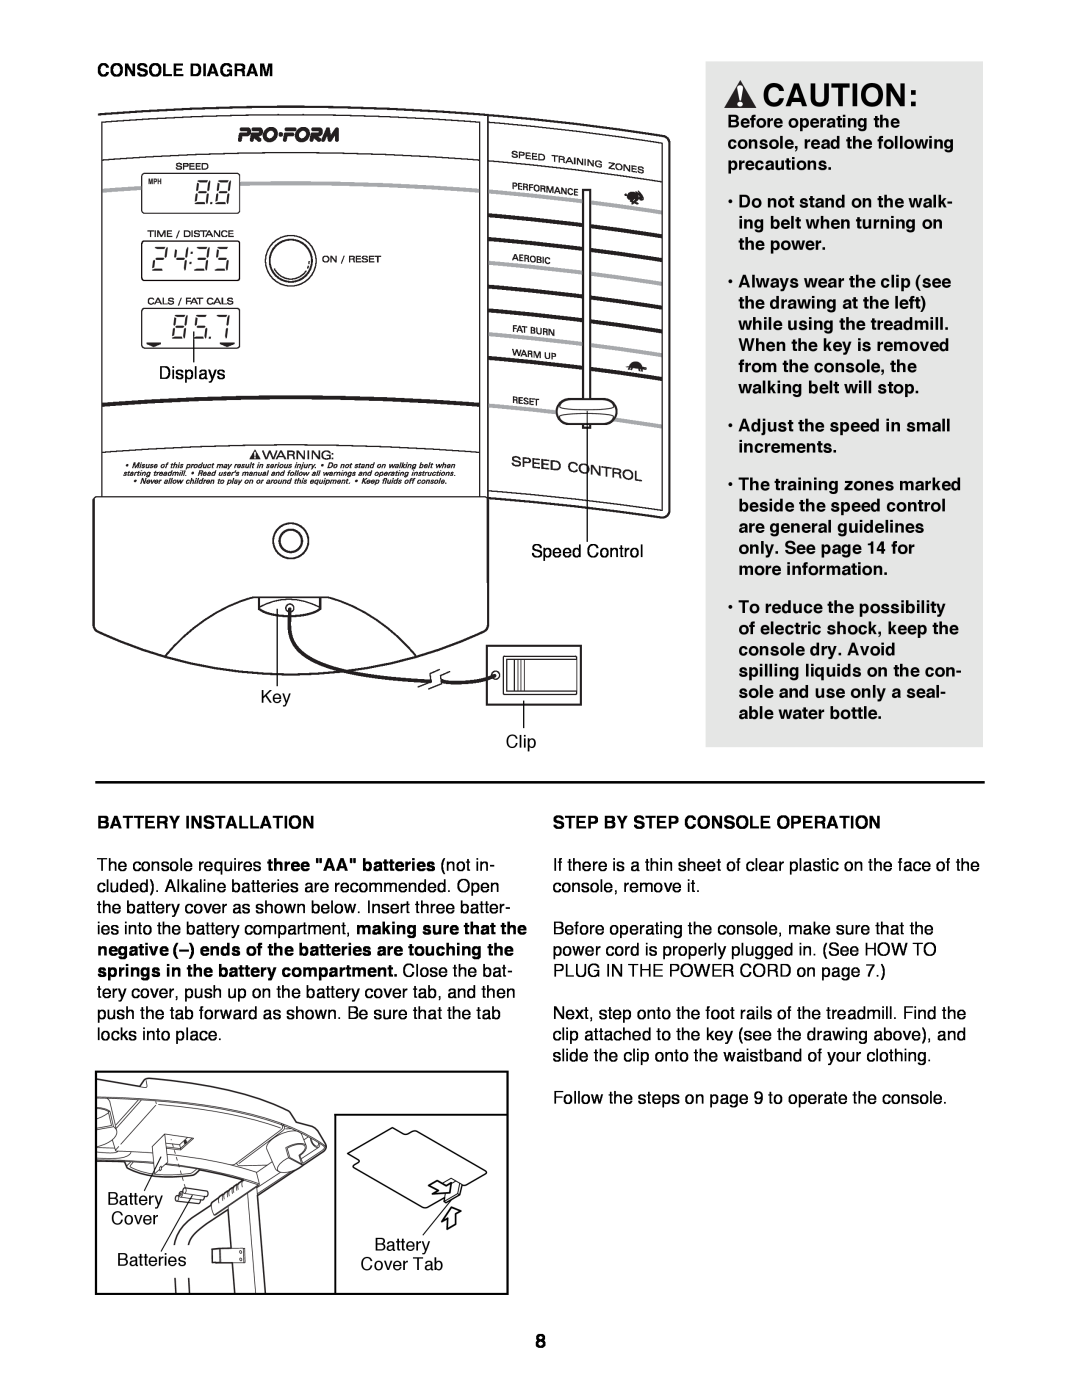 ProForm 831.298061 Console Diagram, Before operating the console, read the following precautions, Battery Installation 